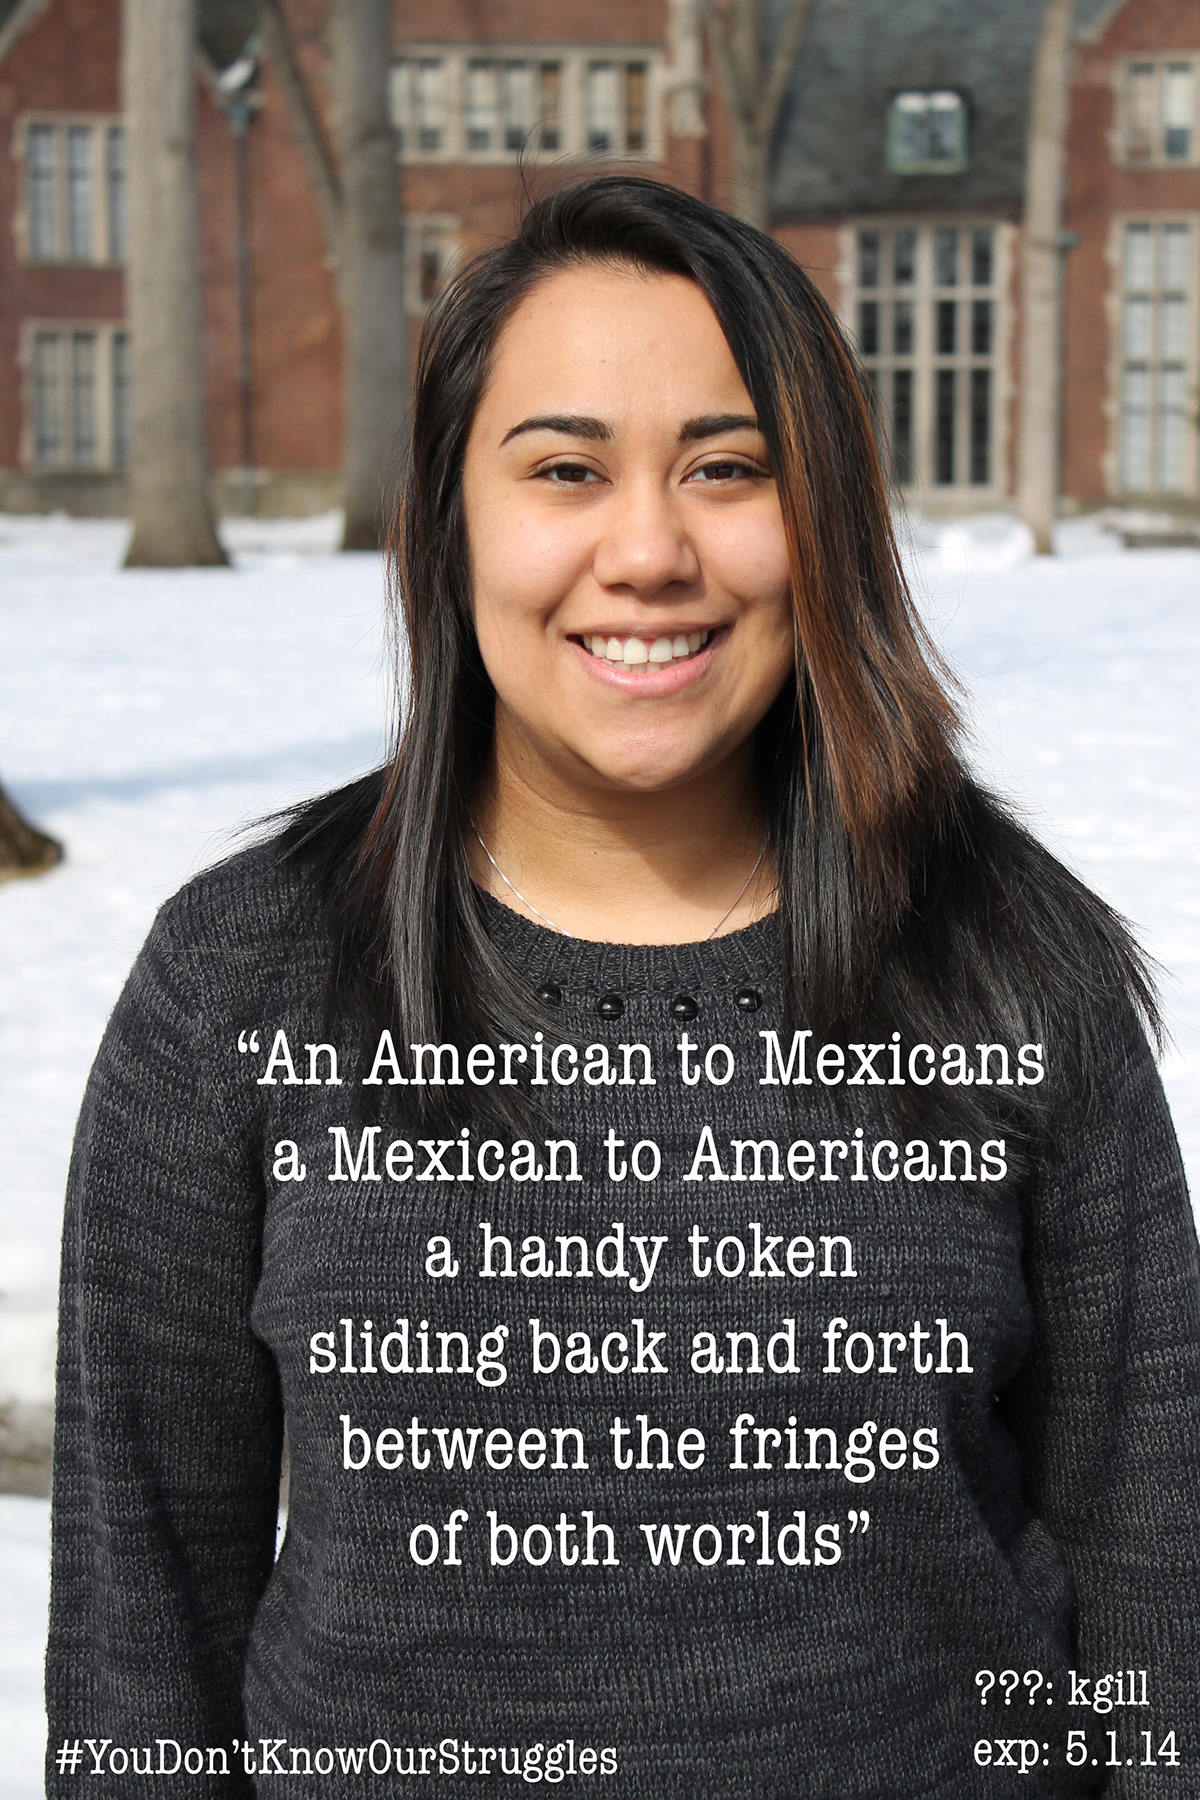 Latin@ Wellesley poster campaign